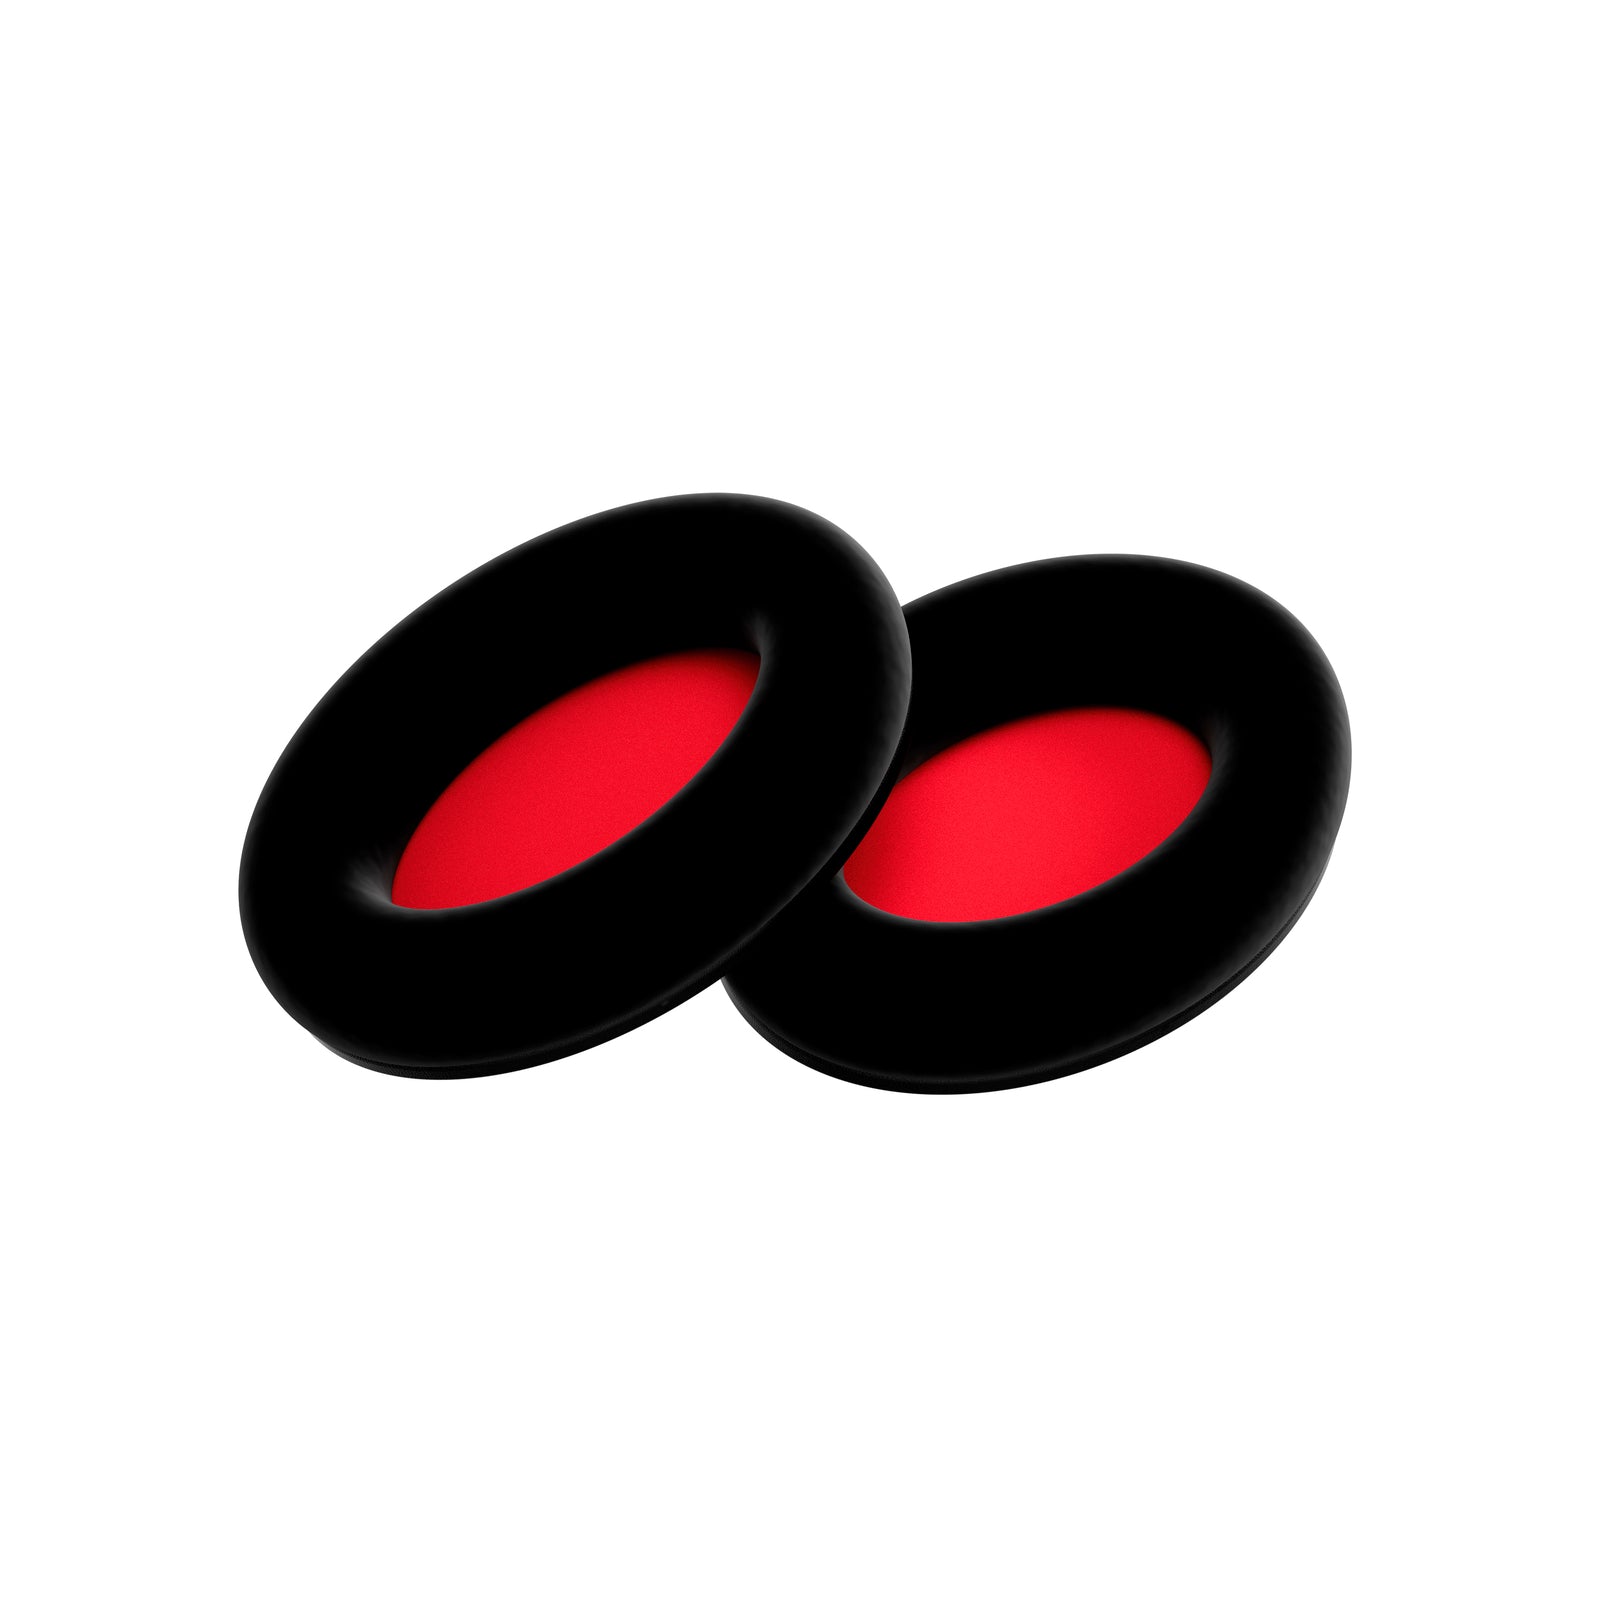 Front view of Velour Cushion Earpads of HyperX Cloud Gaming Headset